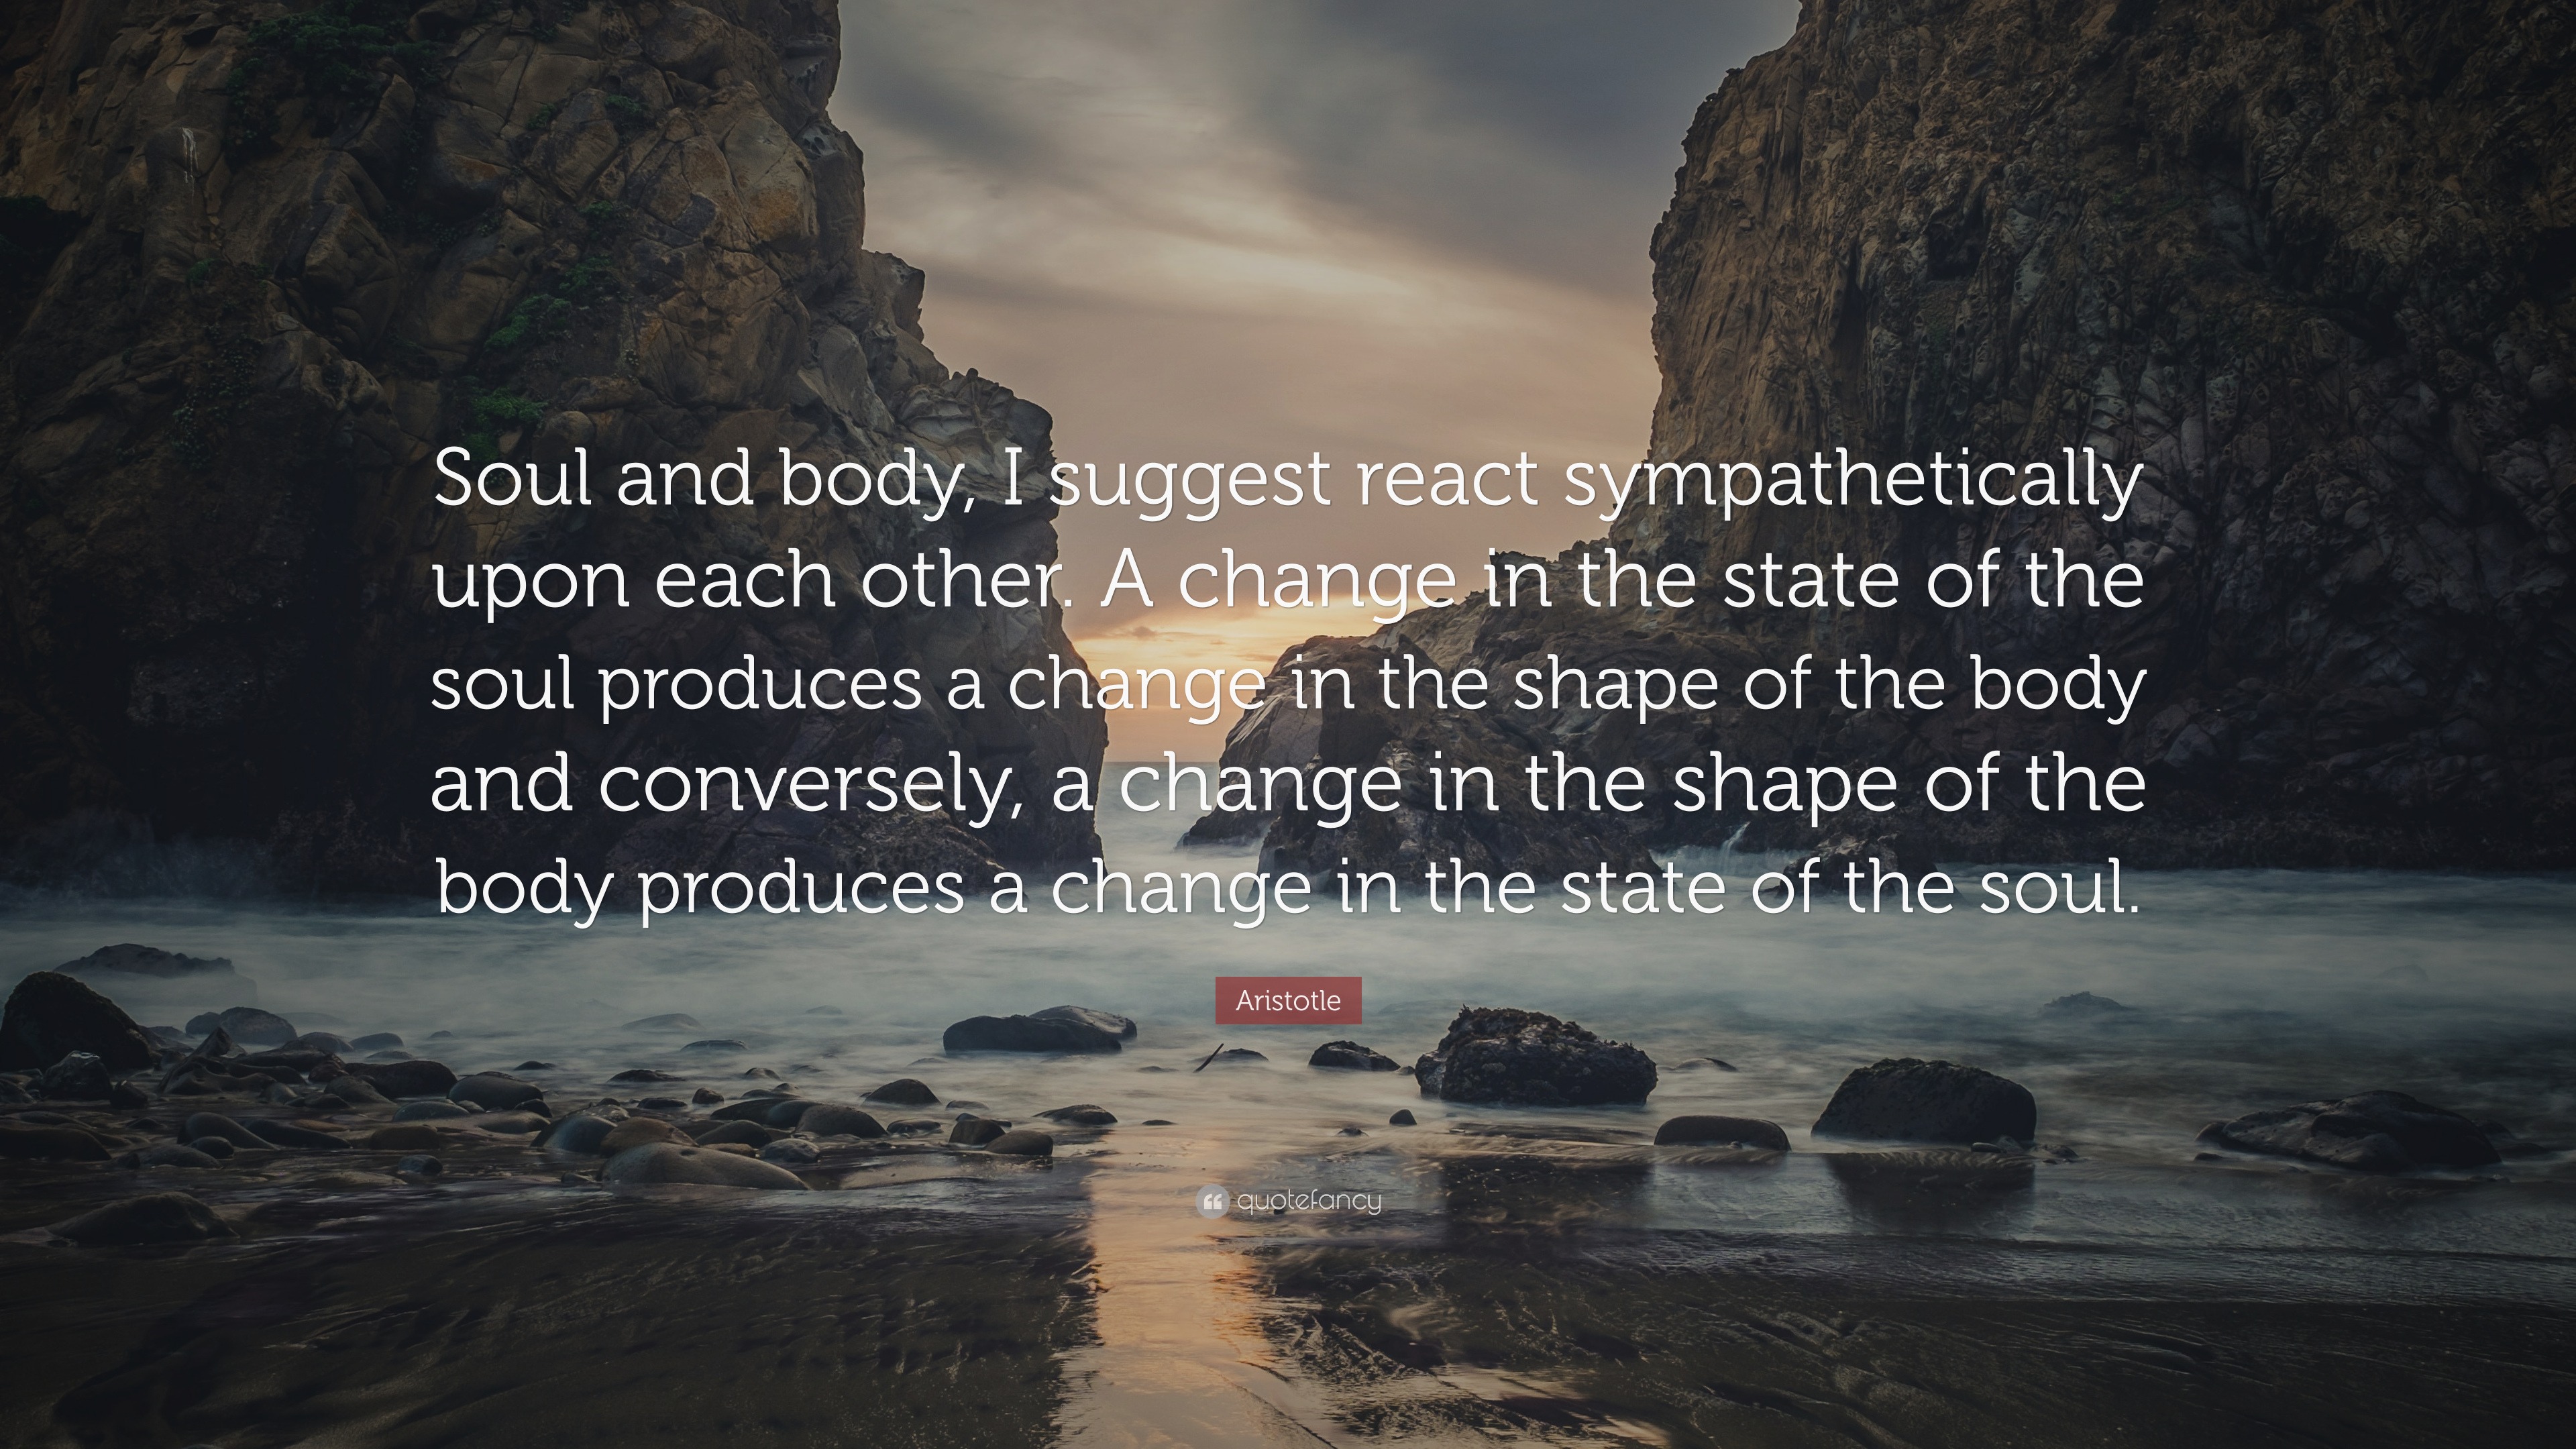 Aristotle Quote: “Soul and body, I suggest react sympathetically upon